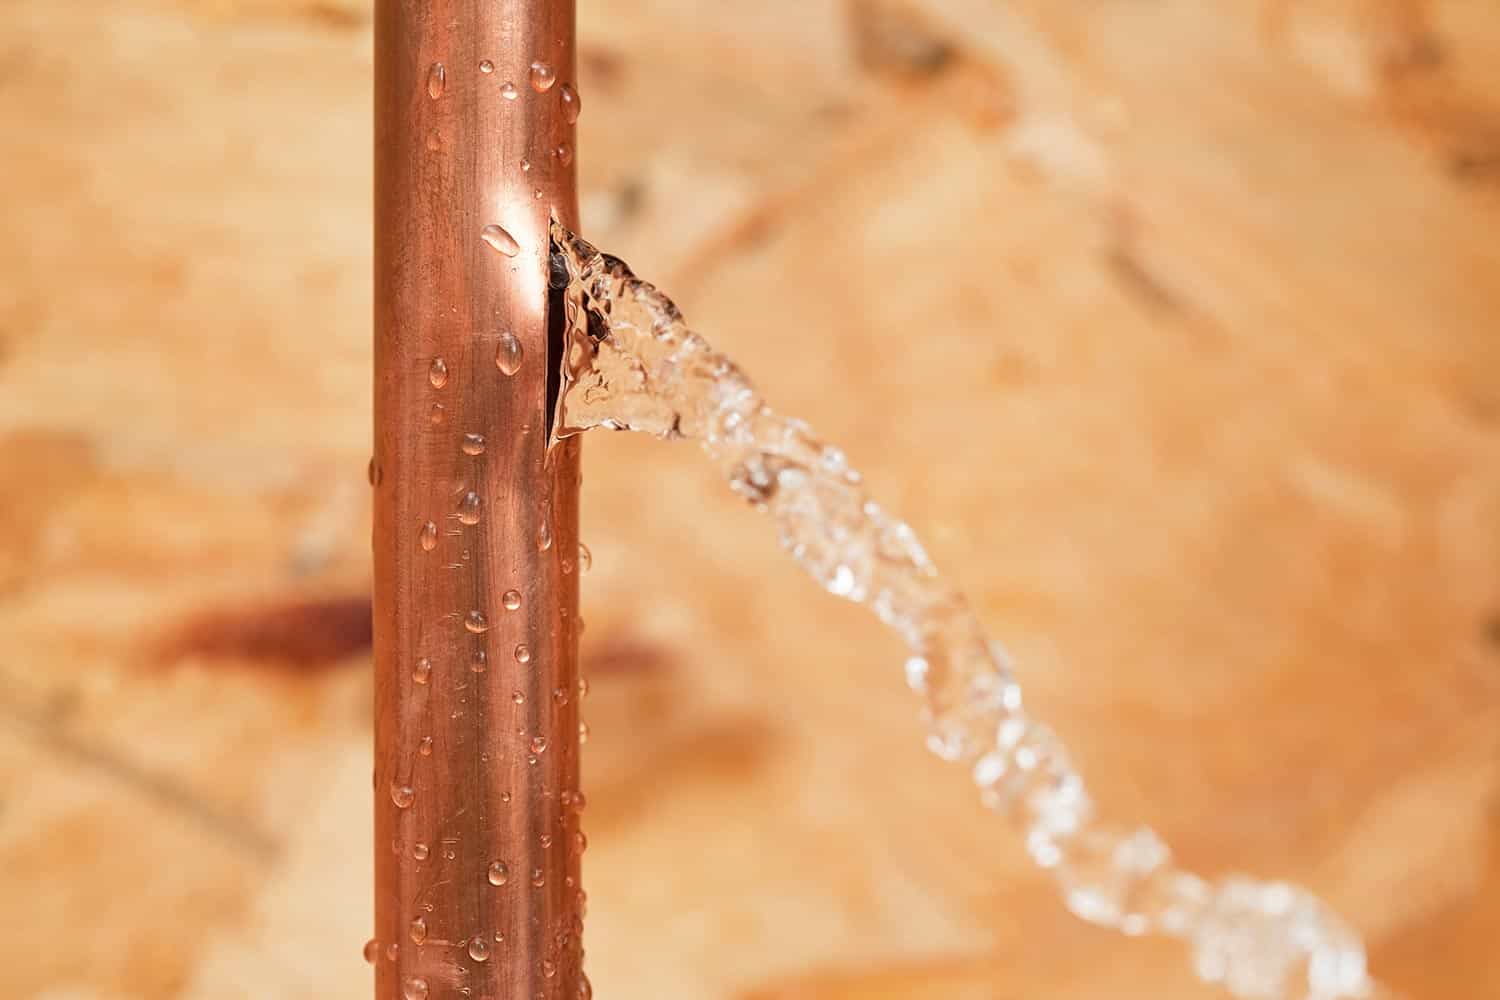 A cracked household copper water pipe